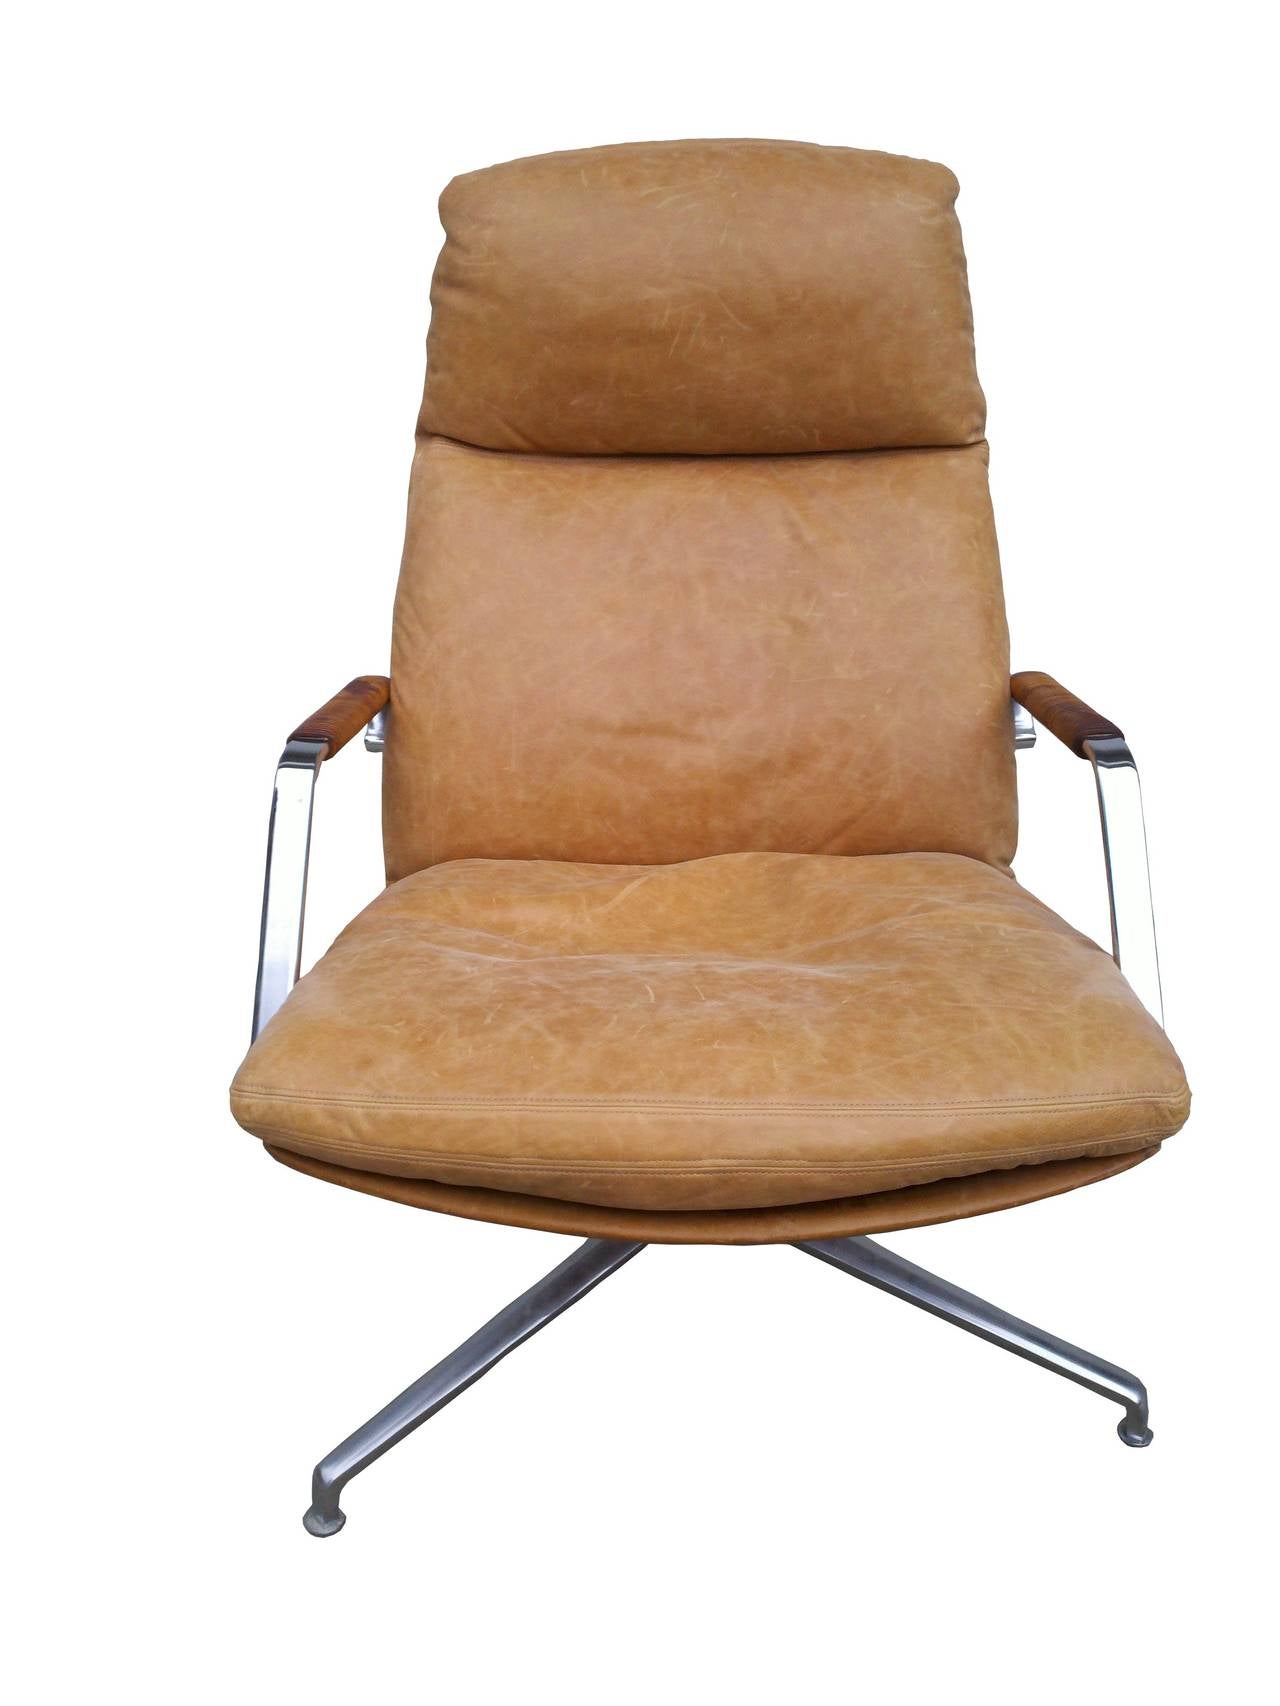 A very nice Danish modern swivel chair designed by Preben Fabricius & Jorgen Kastholm for Kill International, Denmark, 1968. Original leather back and arm banding, the down cushion has been expertly re-leathered with great care given to the original